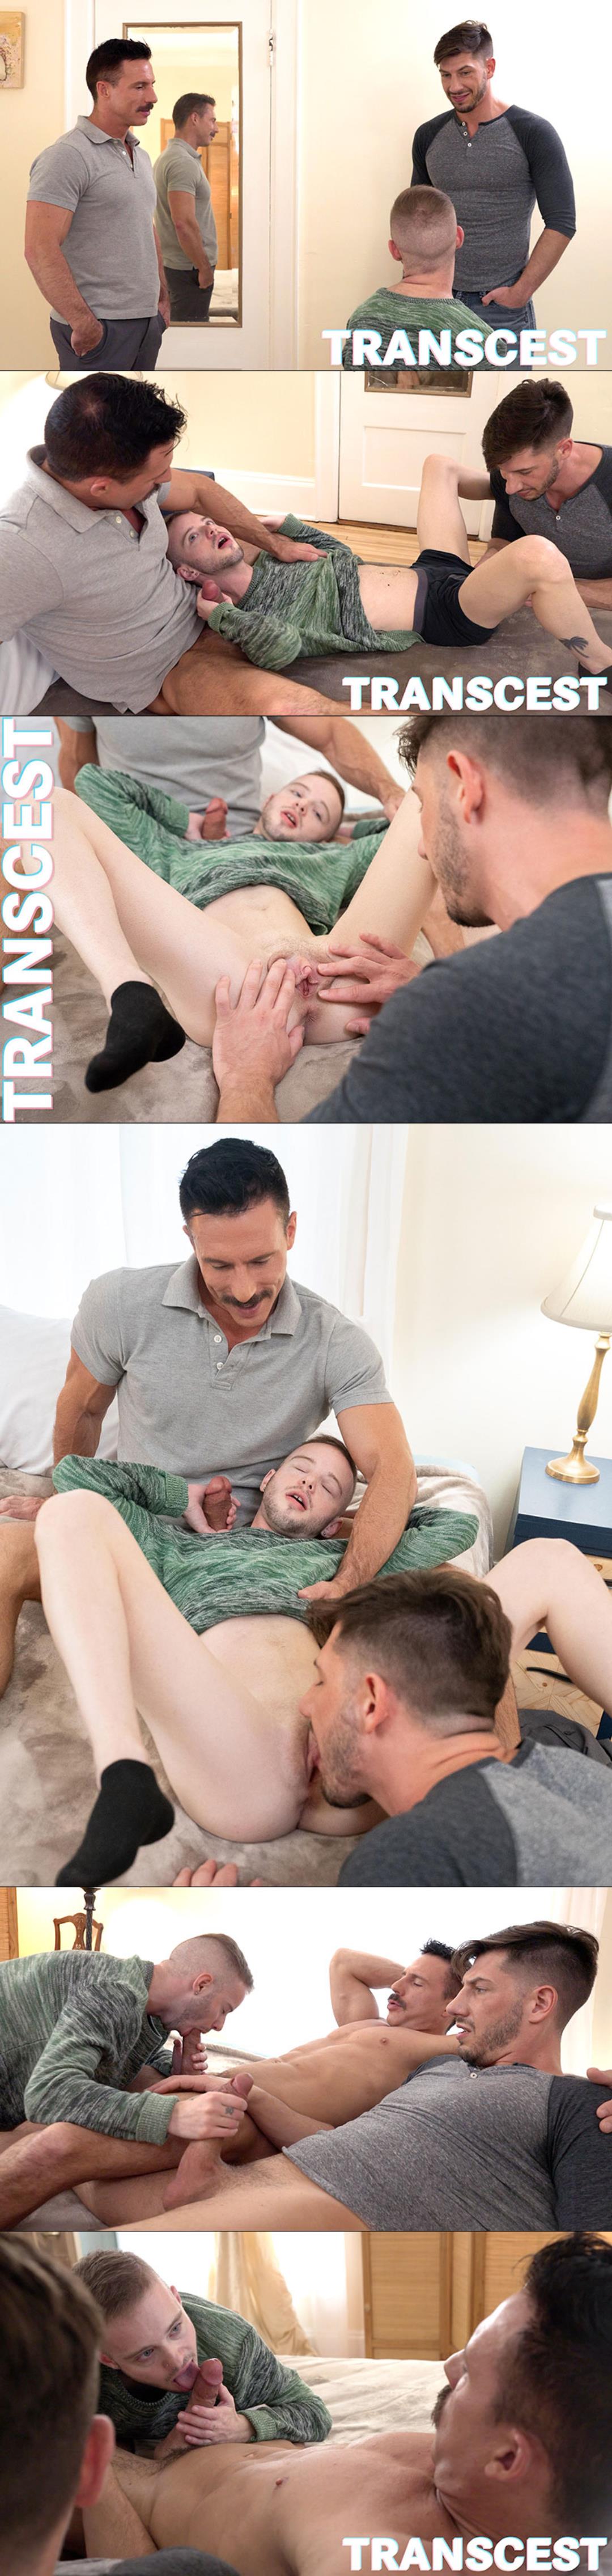 TransCest - Afternoon Passion - Jordan Starr, Reese Rideout, Asher Richards 1